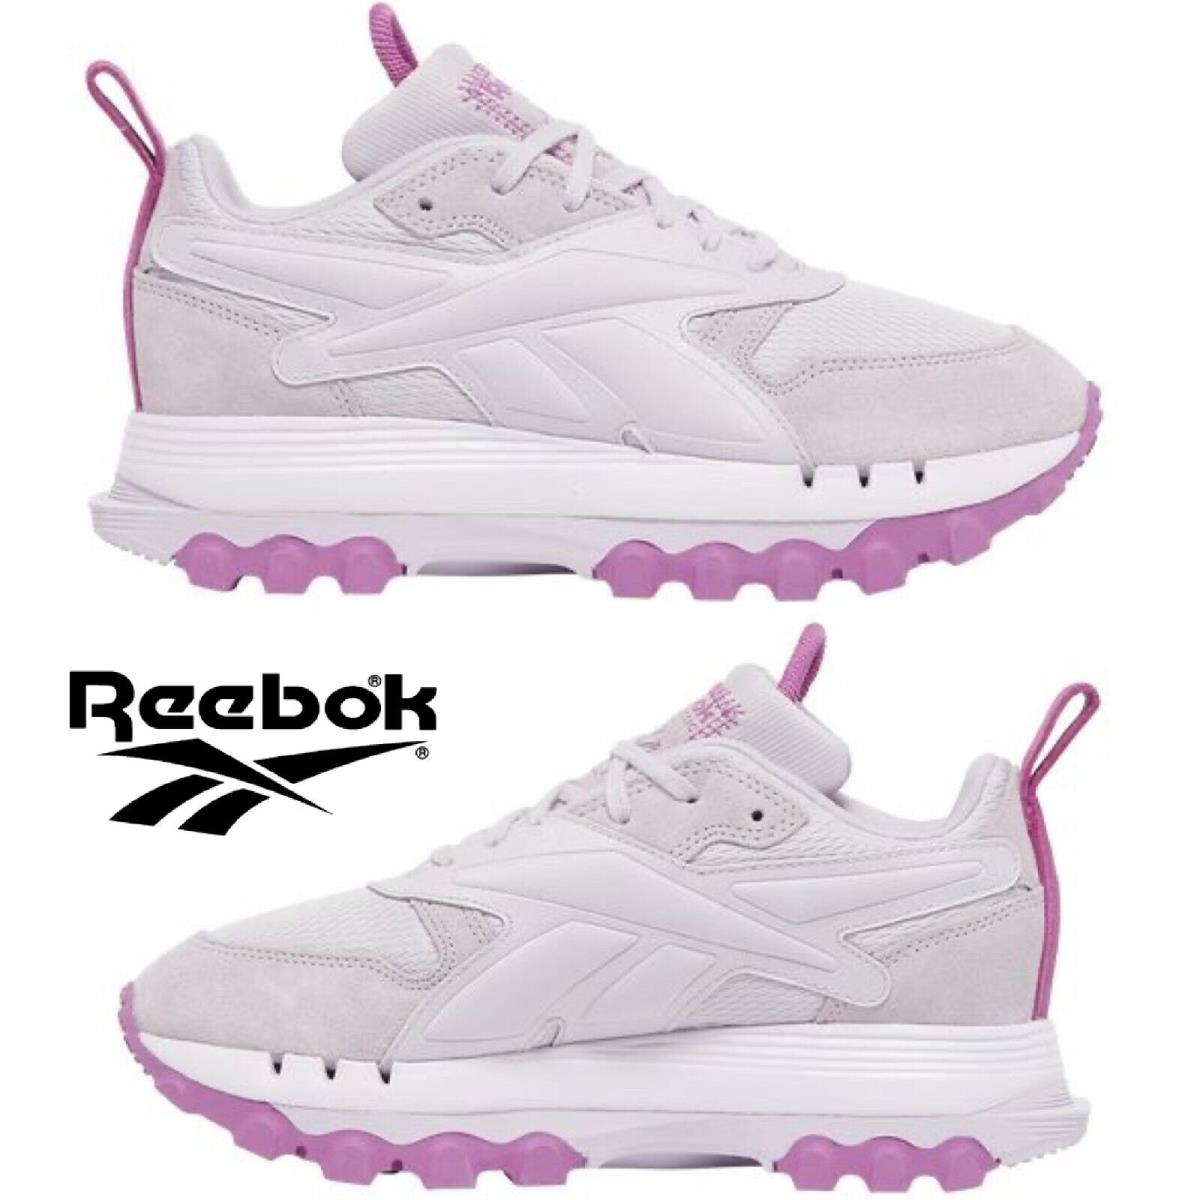 Reebok Classic Leather Cardi V2 Women`s Casual Shoes Sport Sneakers Pink - Pink, Manufacturer: Pink